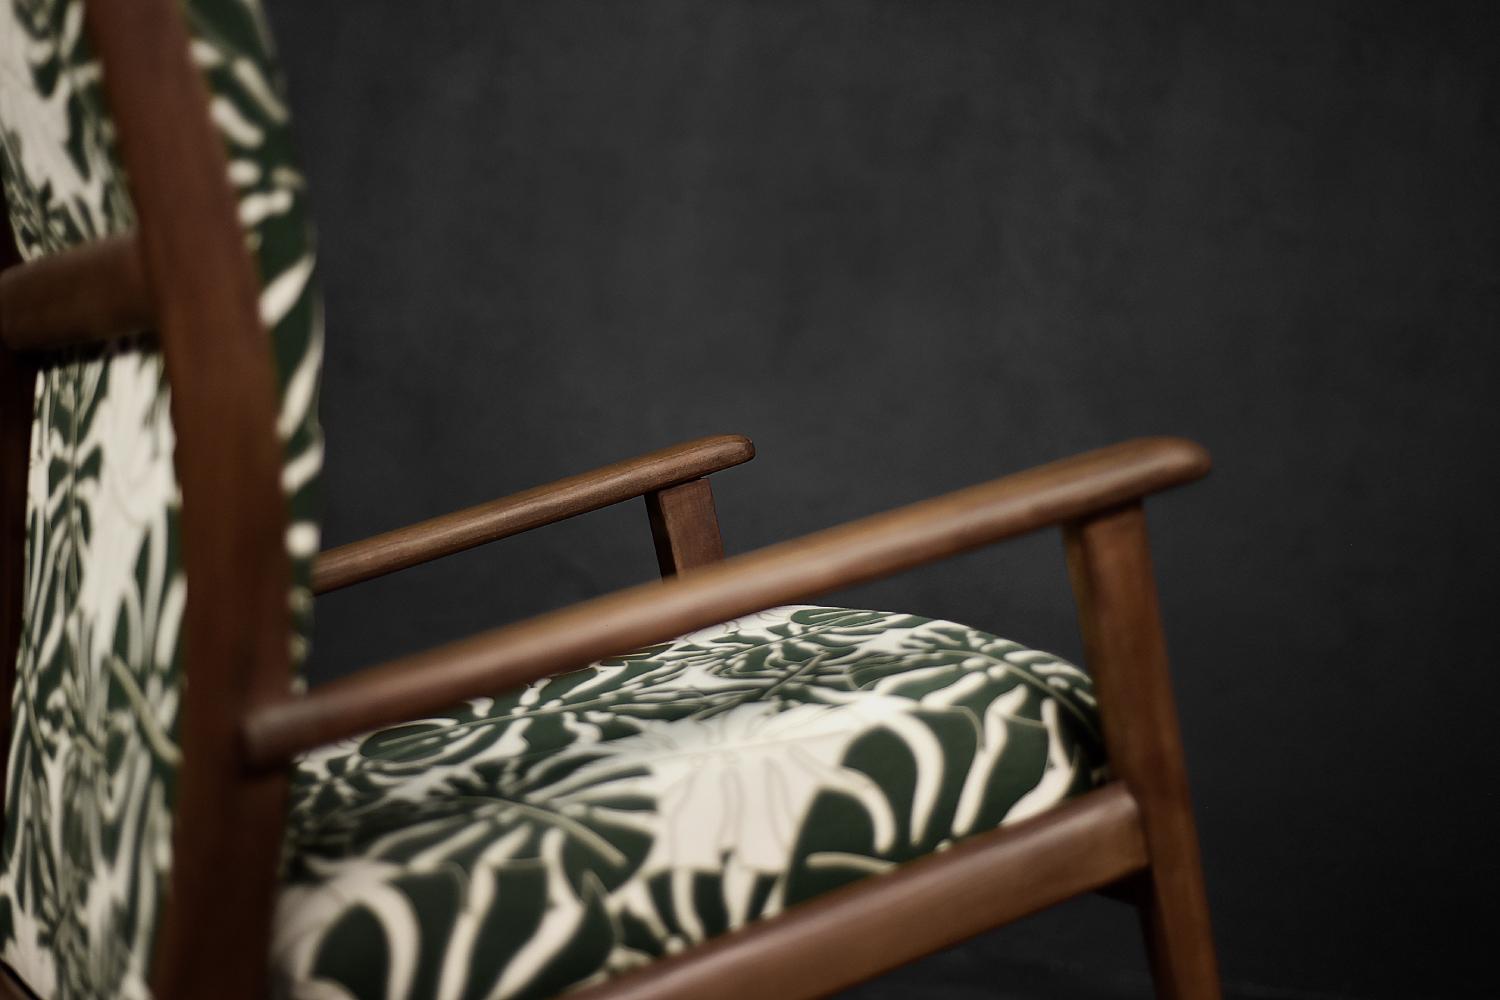 Mid-20th Century Vintage Danish Modern Rocking Chair in Wood and Monstera Leaf Pattern Fabric For Sale